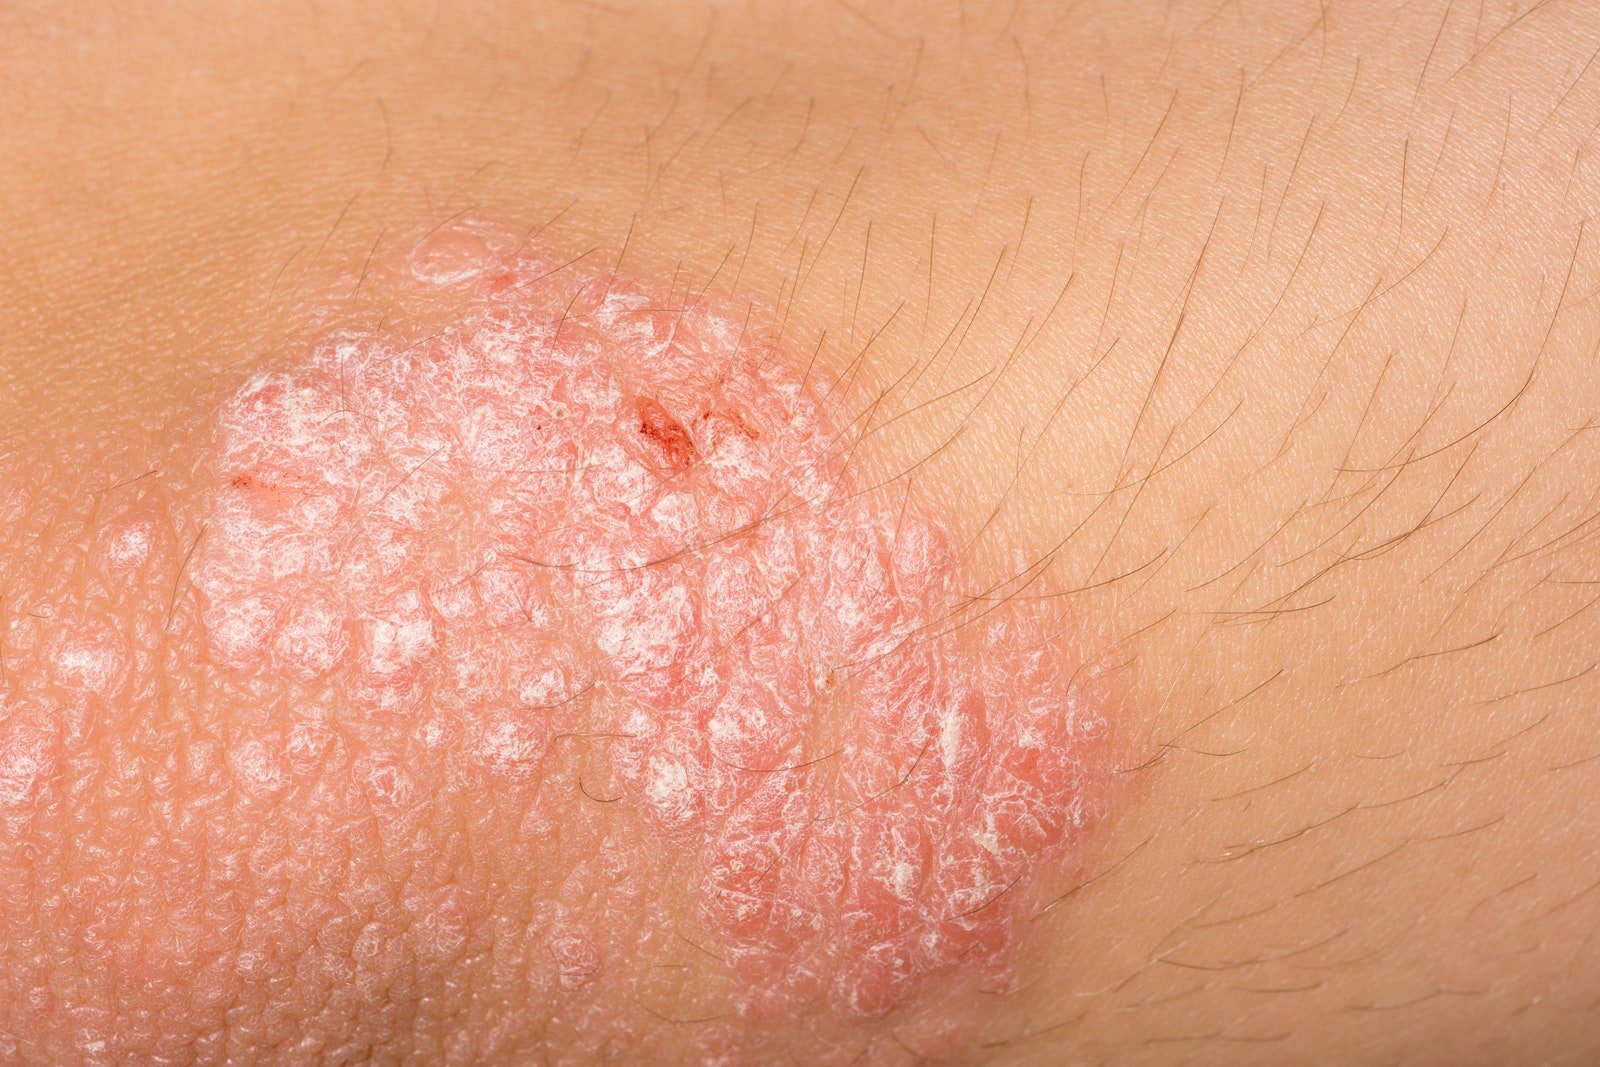 What Is Psoriasis? Signs and Treatment Options ...